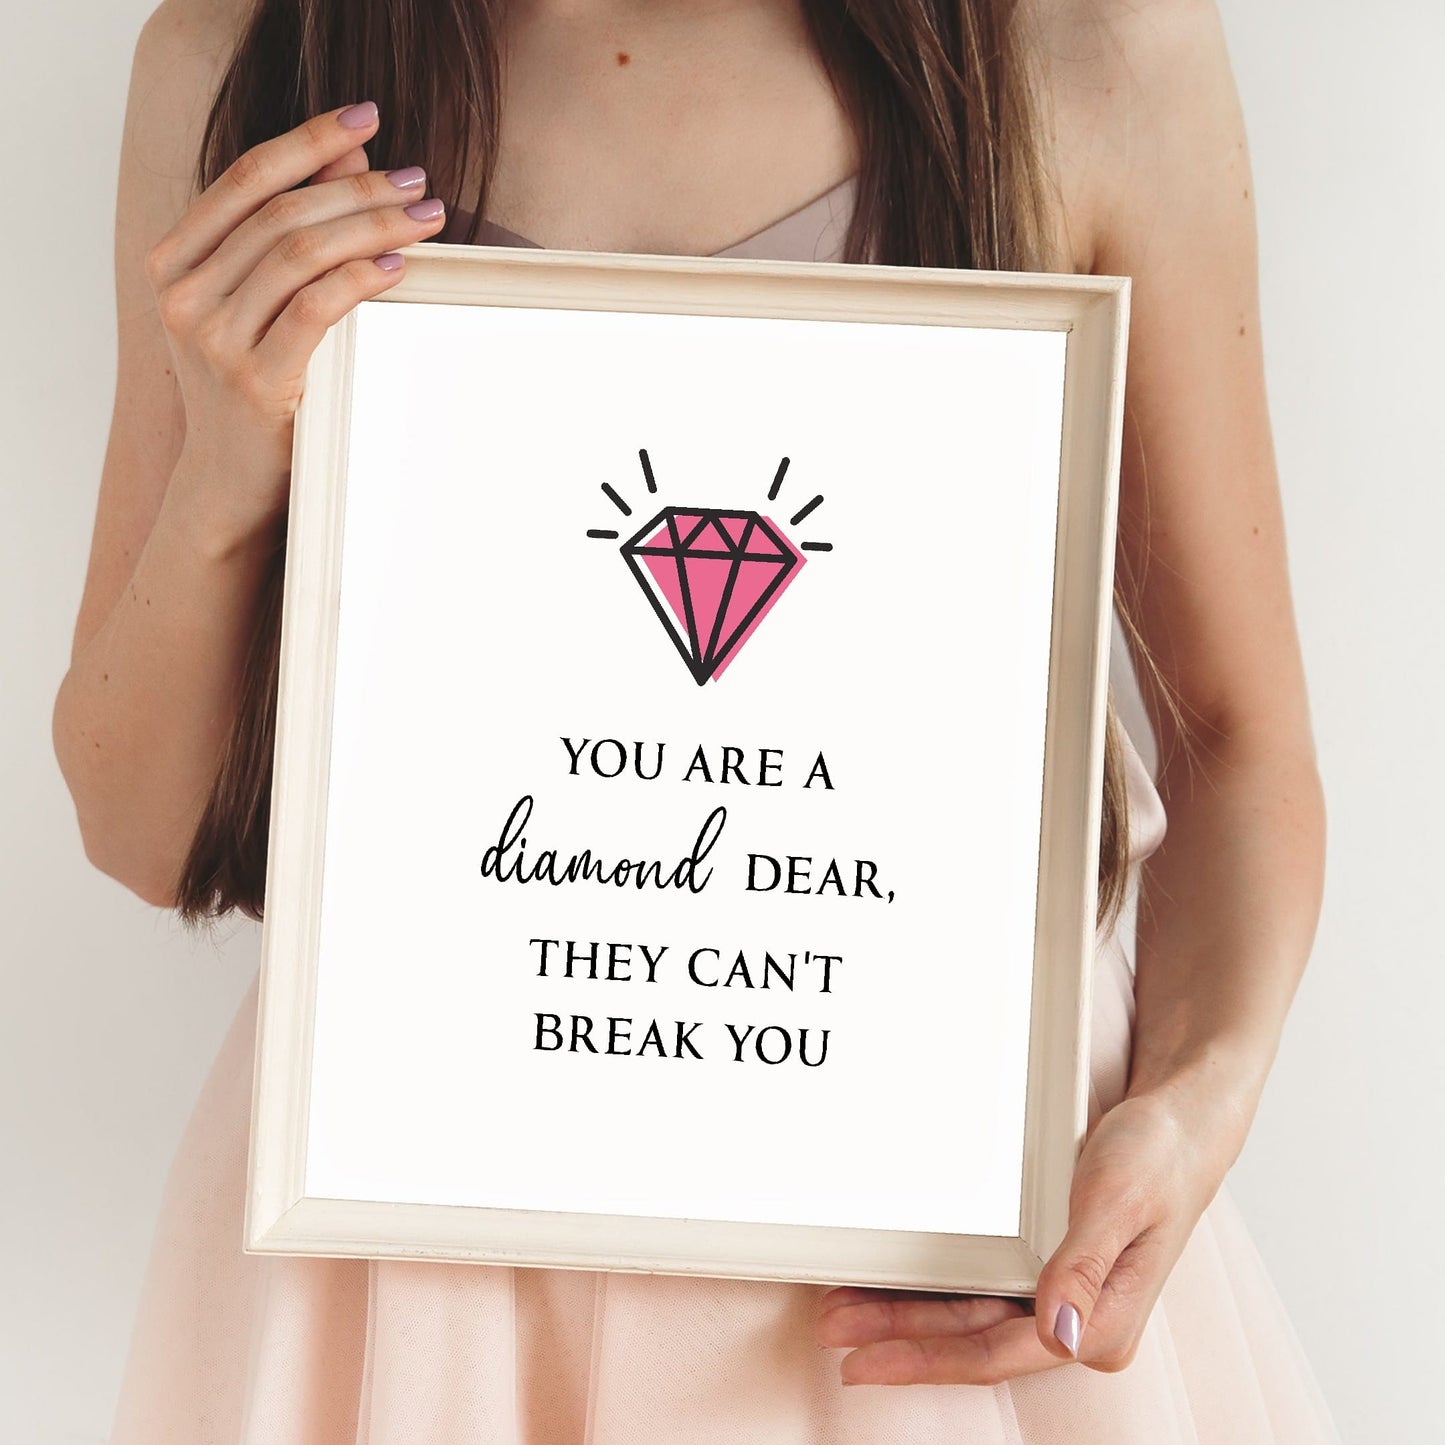 Quote Print | You Are A Diamond Dear, They Can't Break You | Positive Print